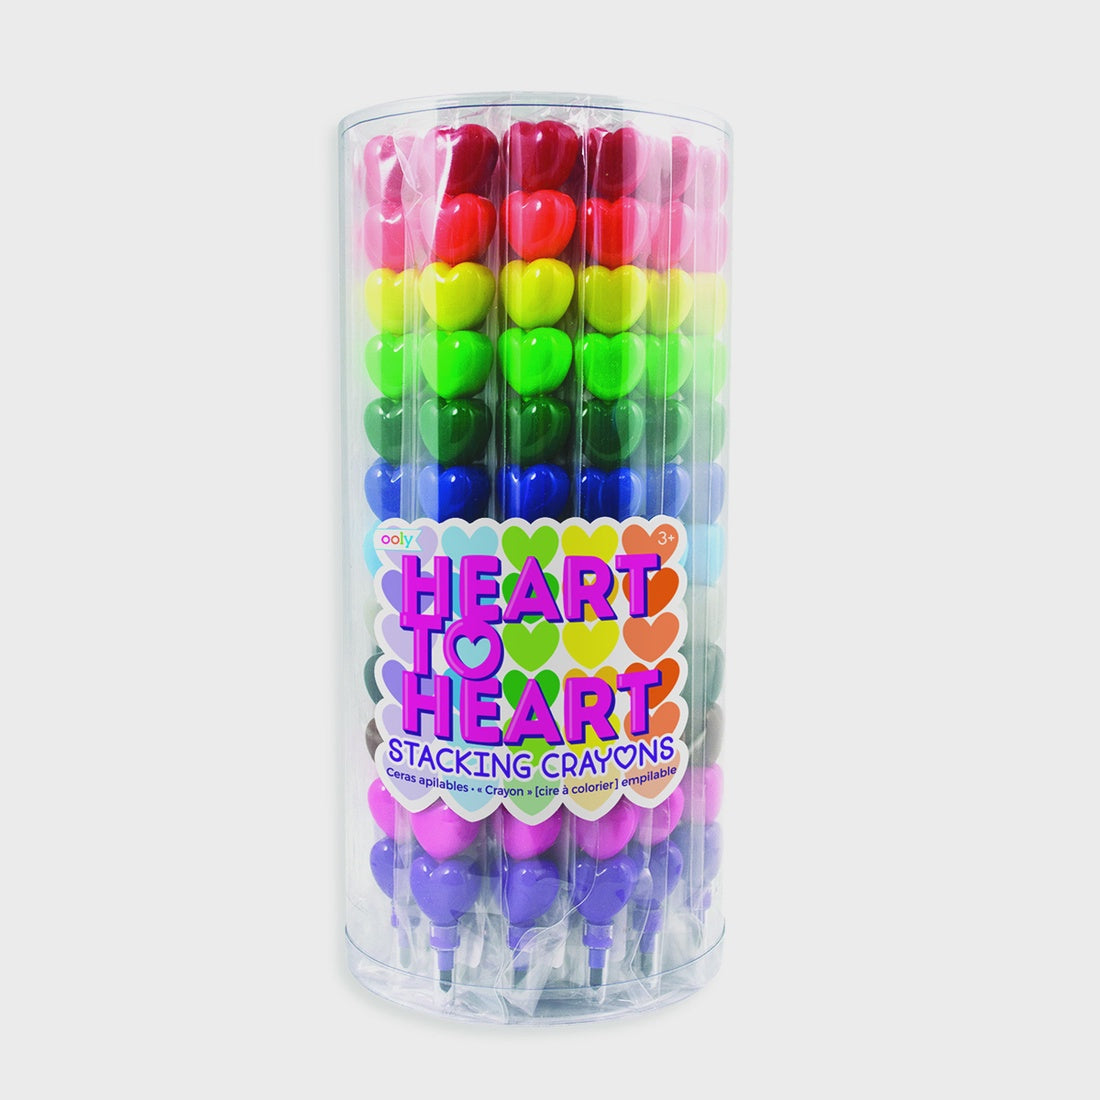 Charm to Charm Stacking Crayons